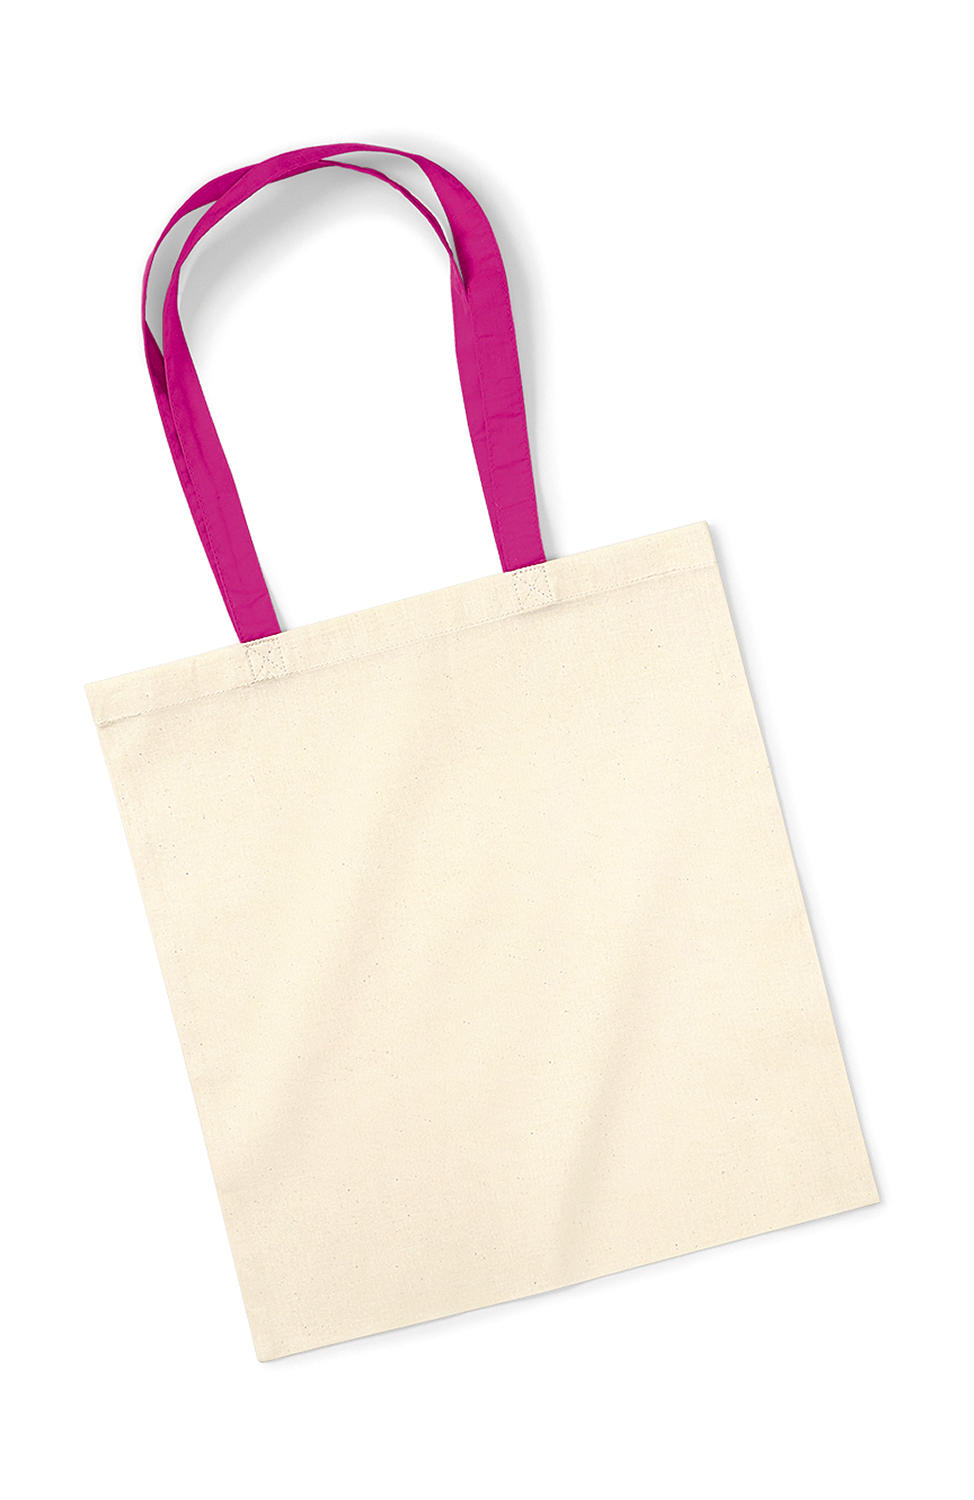  Bag for Life - Contrast Handles in Farbe Natural/Fuchsia